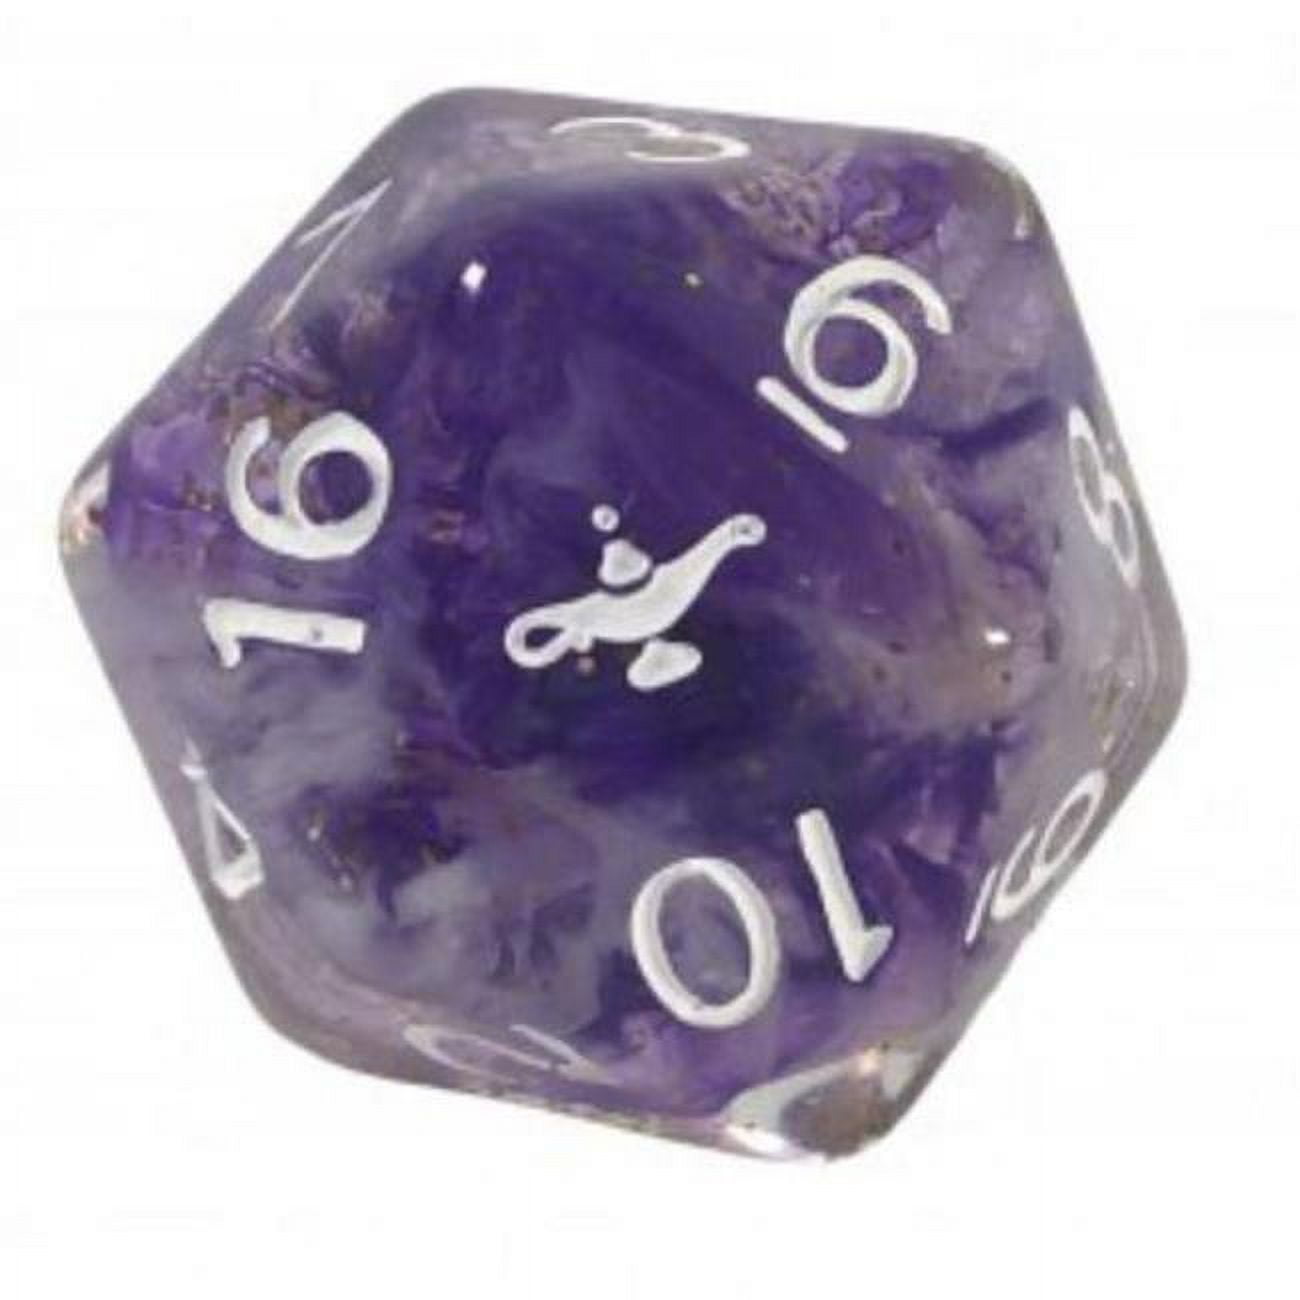 Picture of Role 4 Initiative R4I50534-XL20 29 mm Diffusion Djinnis Wish Dice